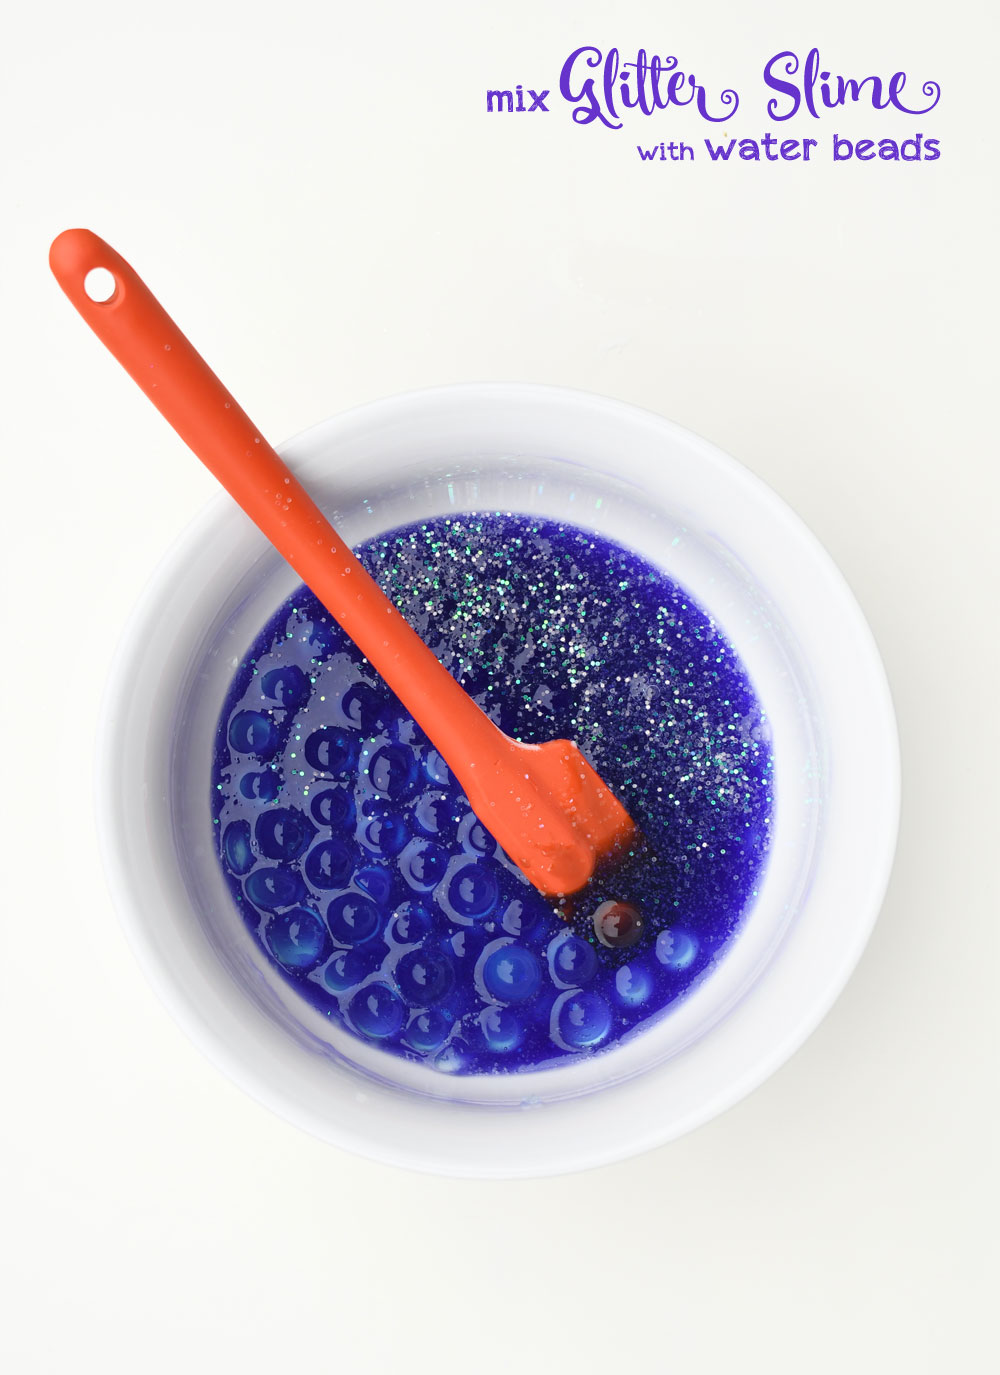 How to make glitter slime with water beads